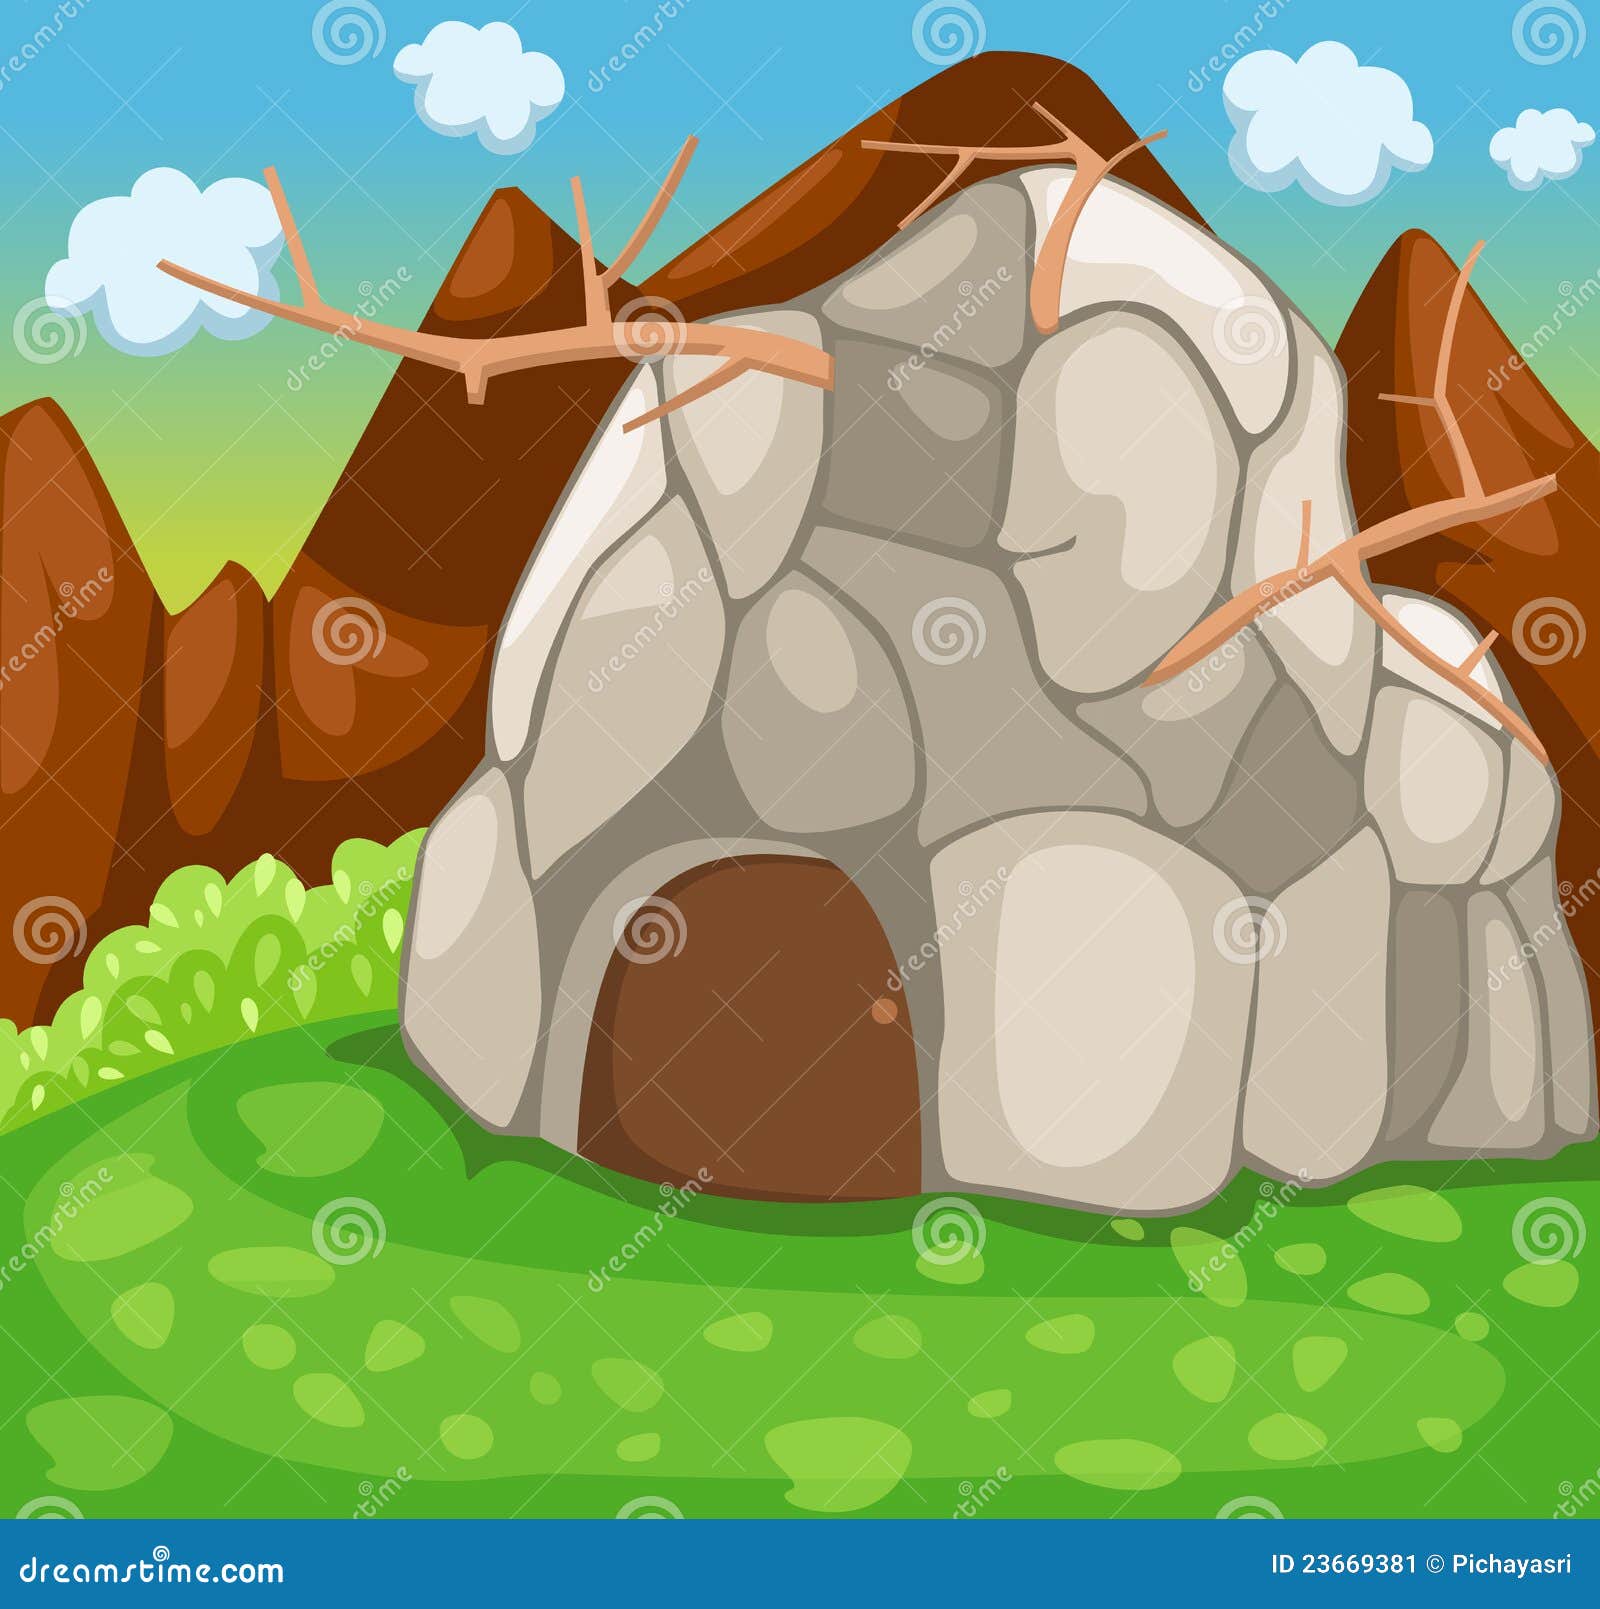 house on rock clipart - photo #29